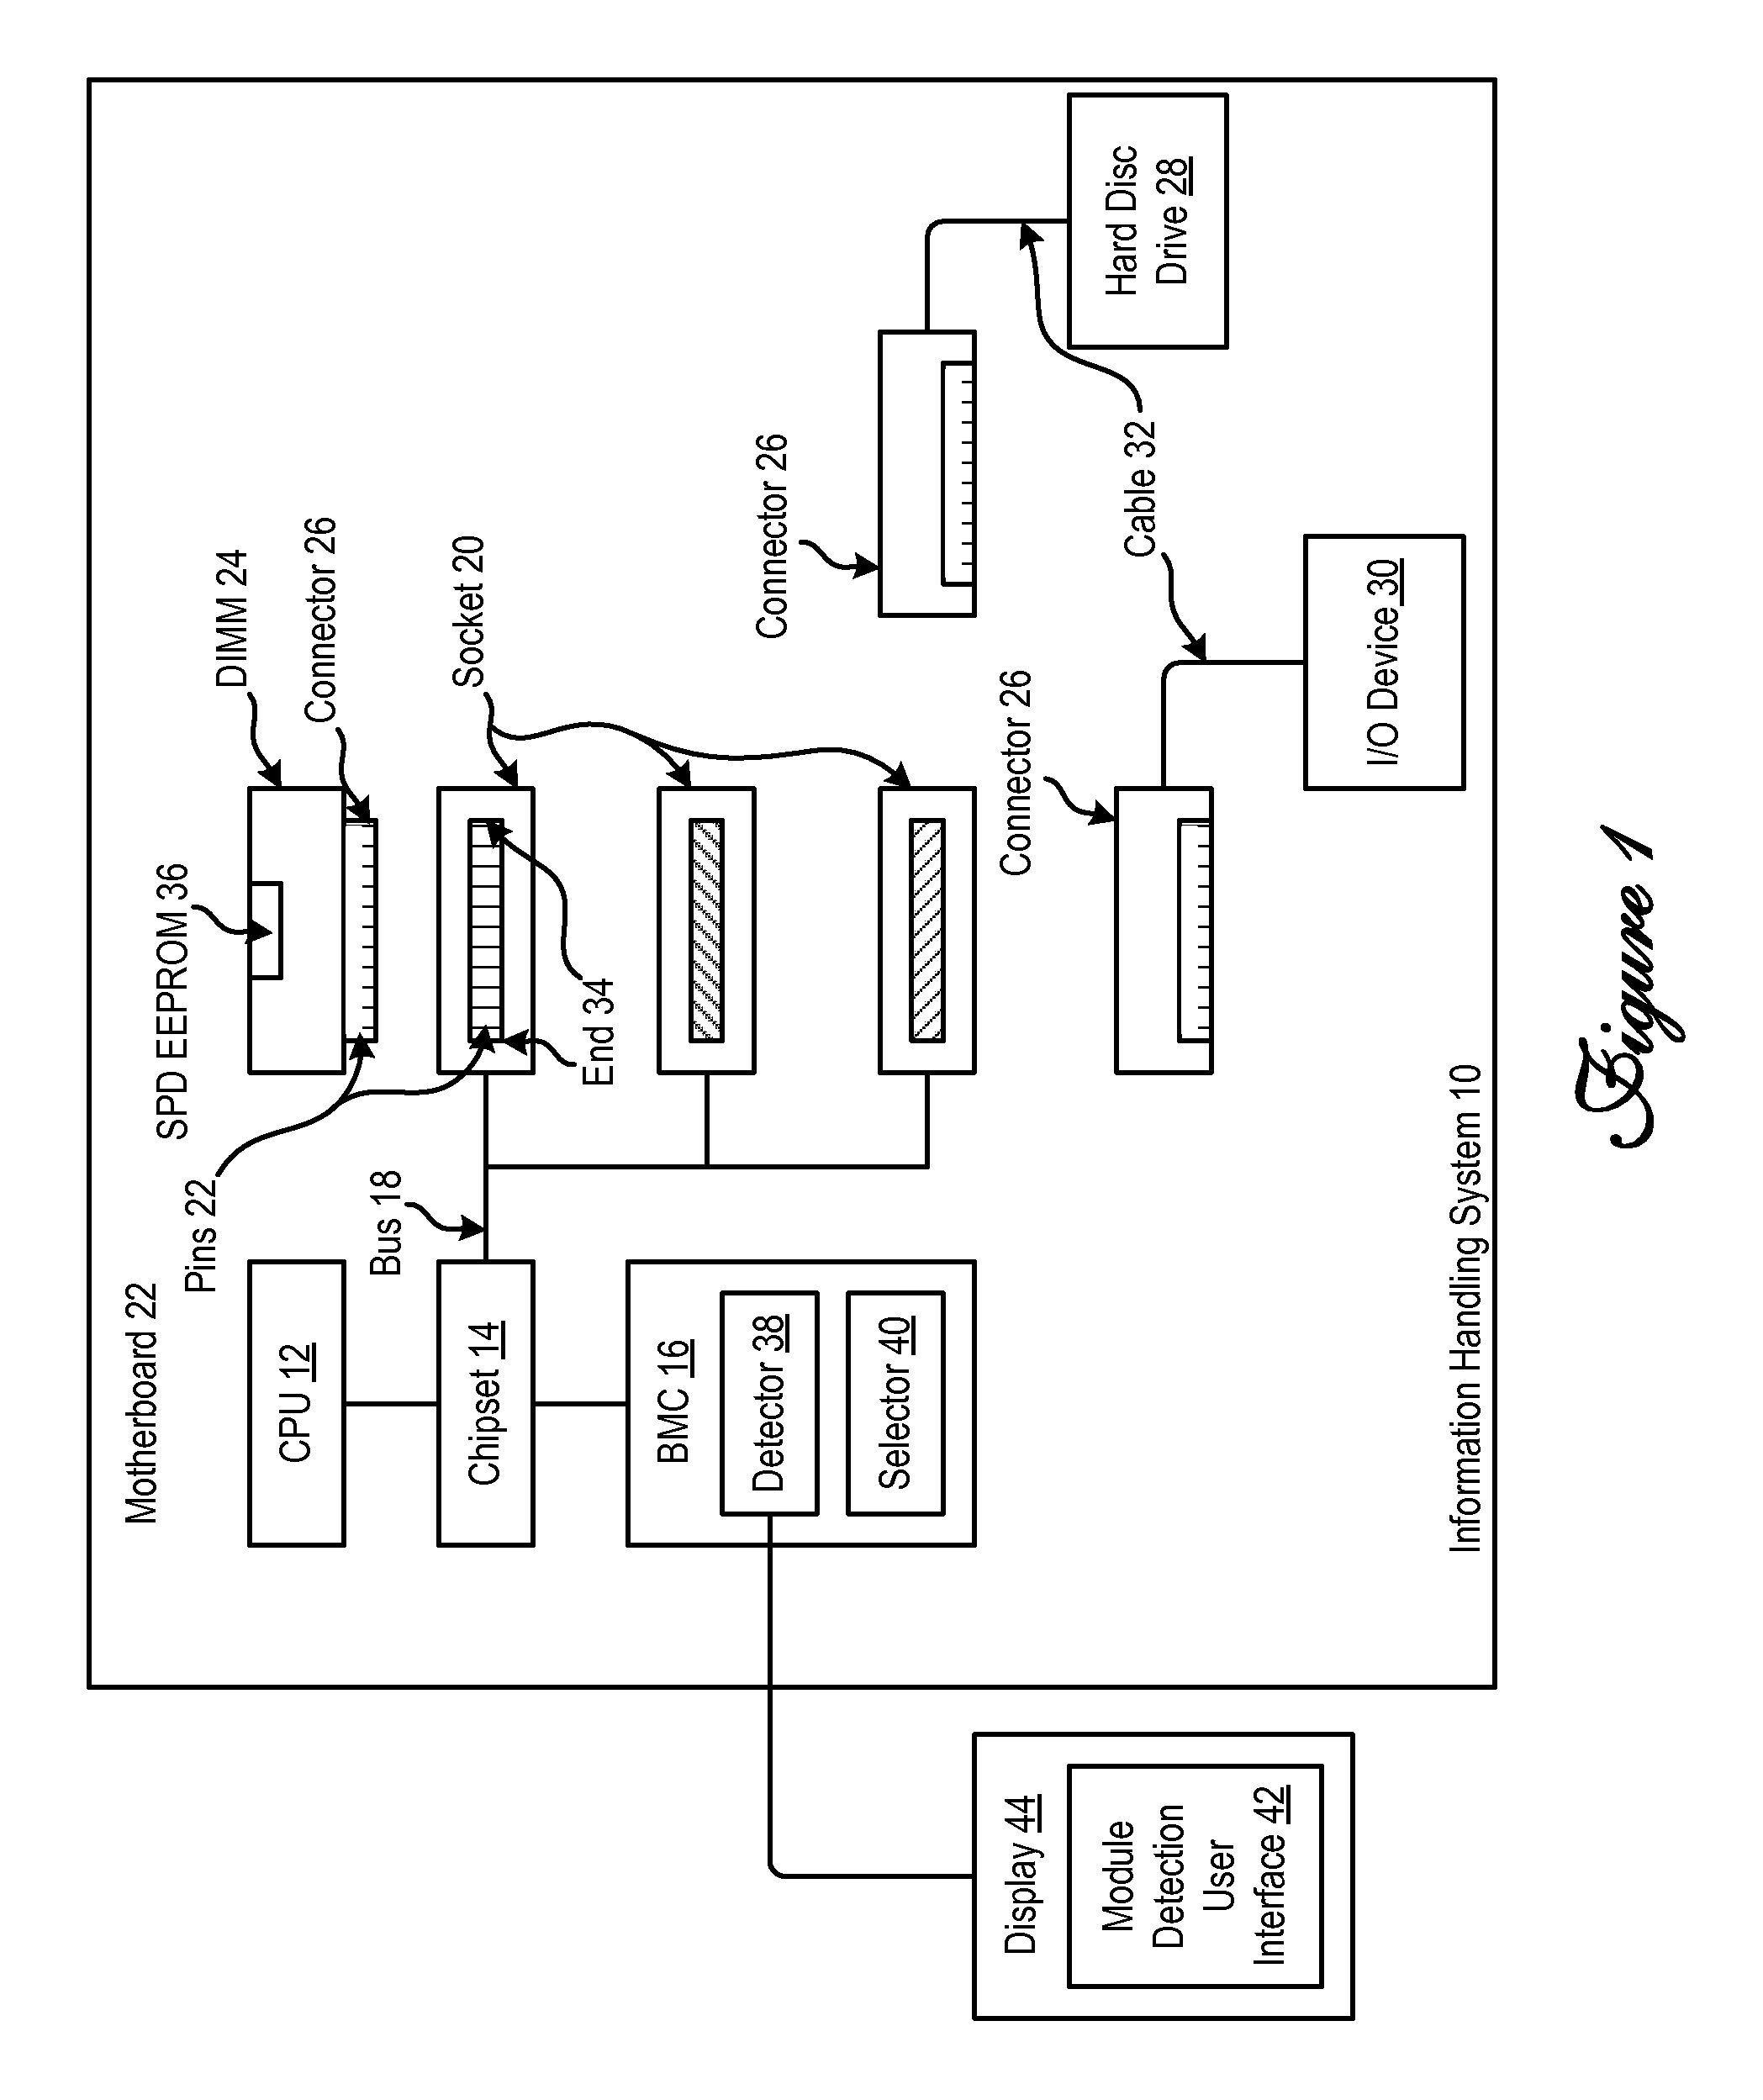 System and Method for Detecting Module Presence in an Information Handling System